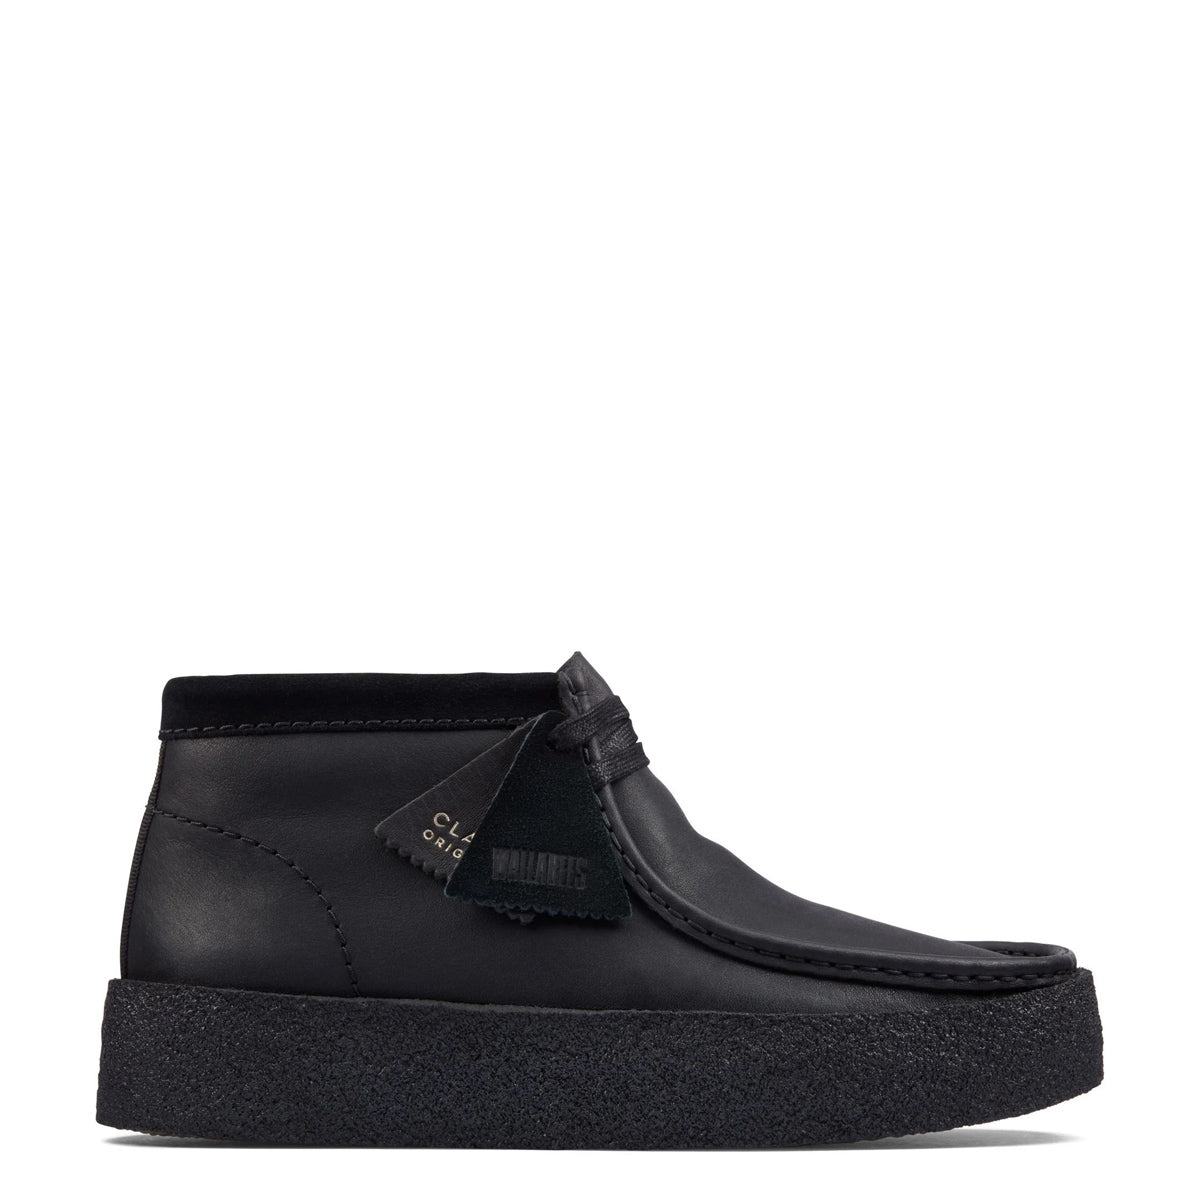 Clarks - Wallabee Cup Bt Black Leather Shoe - 26163169 - BLACK/LEATHER